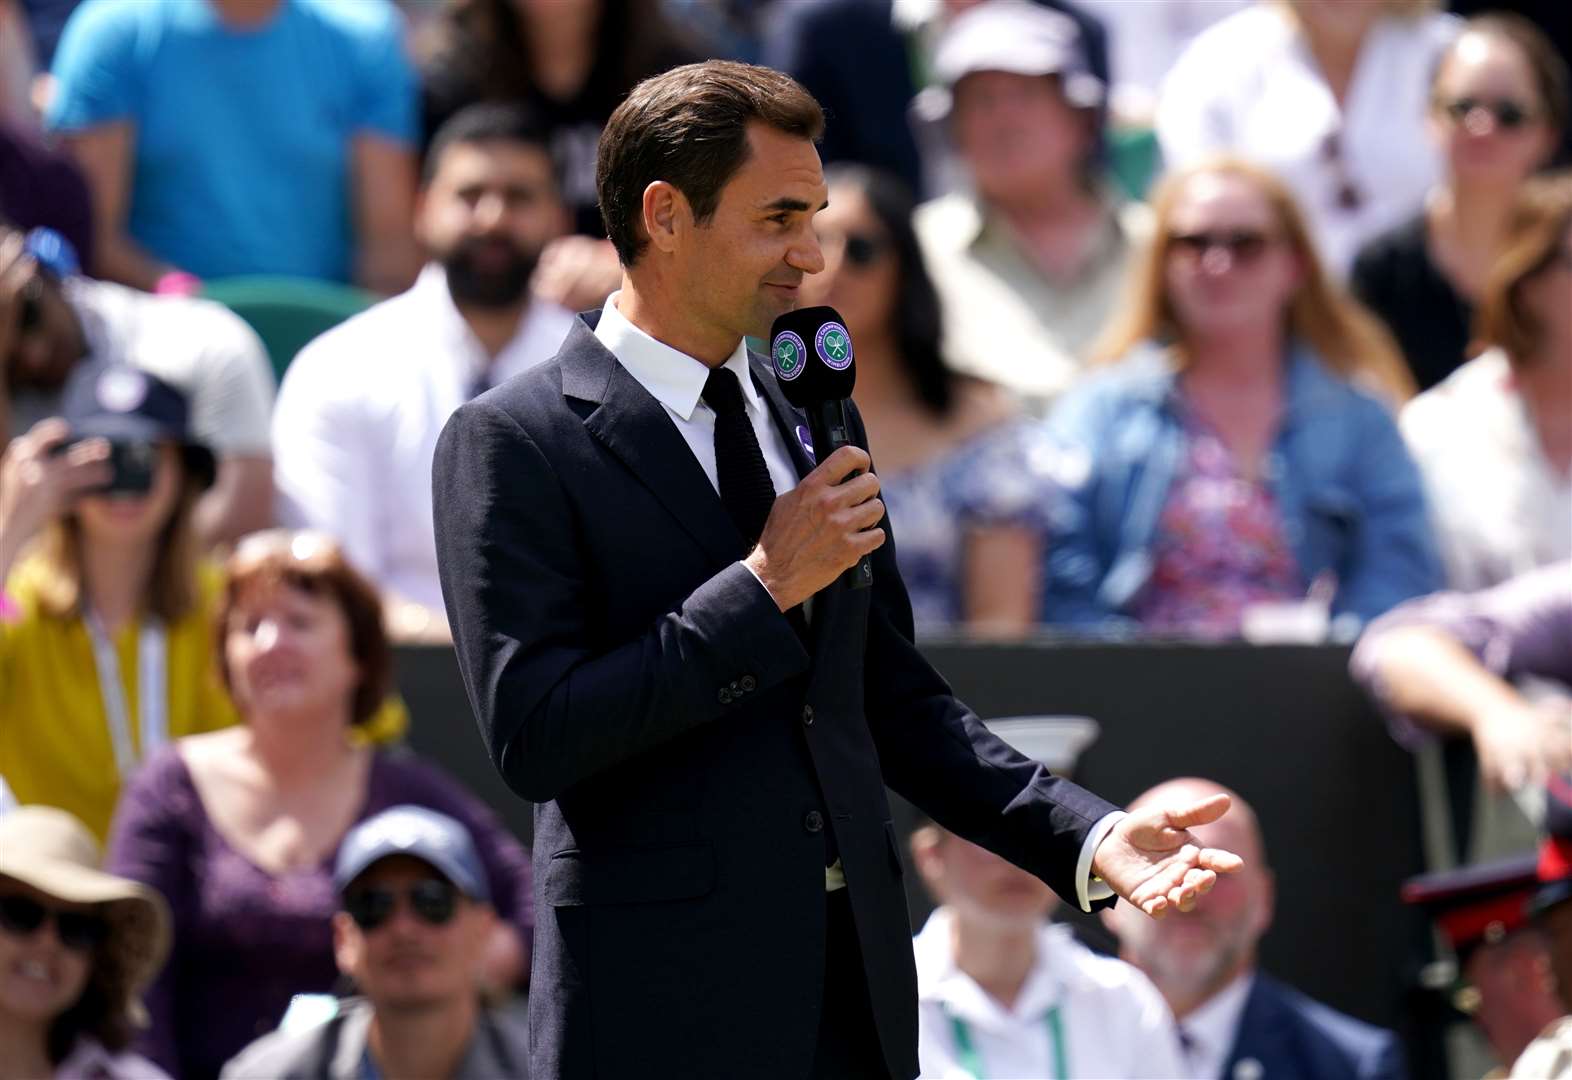 Roger Federer told spectators during a Centre Court centenary ceremony that he hopes to return to Wimbledon after recovering from his knee injury (John Walton/PA)